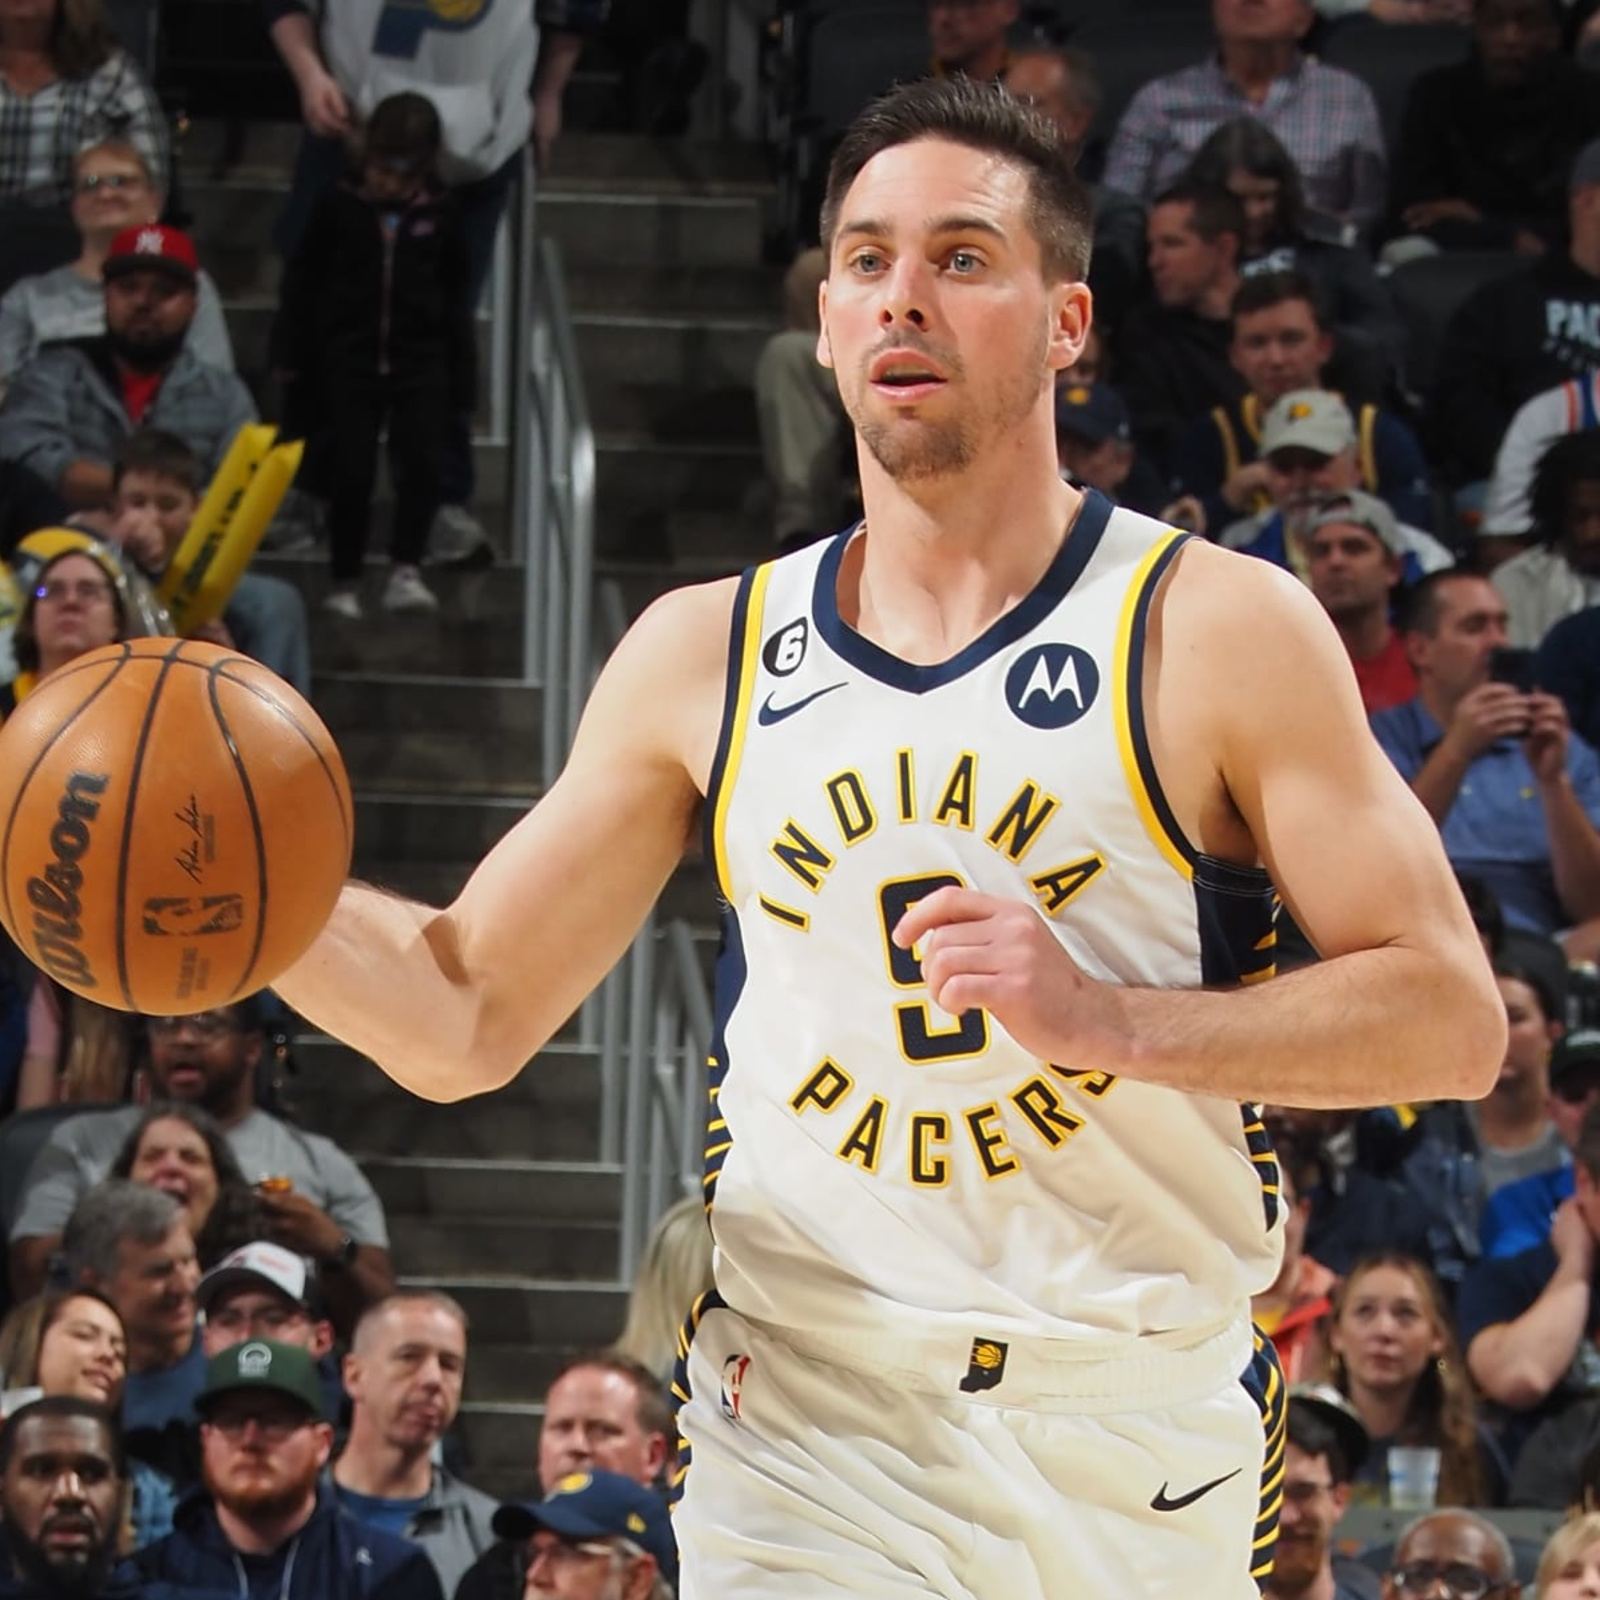 4 Biggest Indiana Pacers Trades